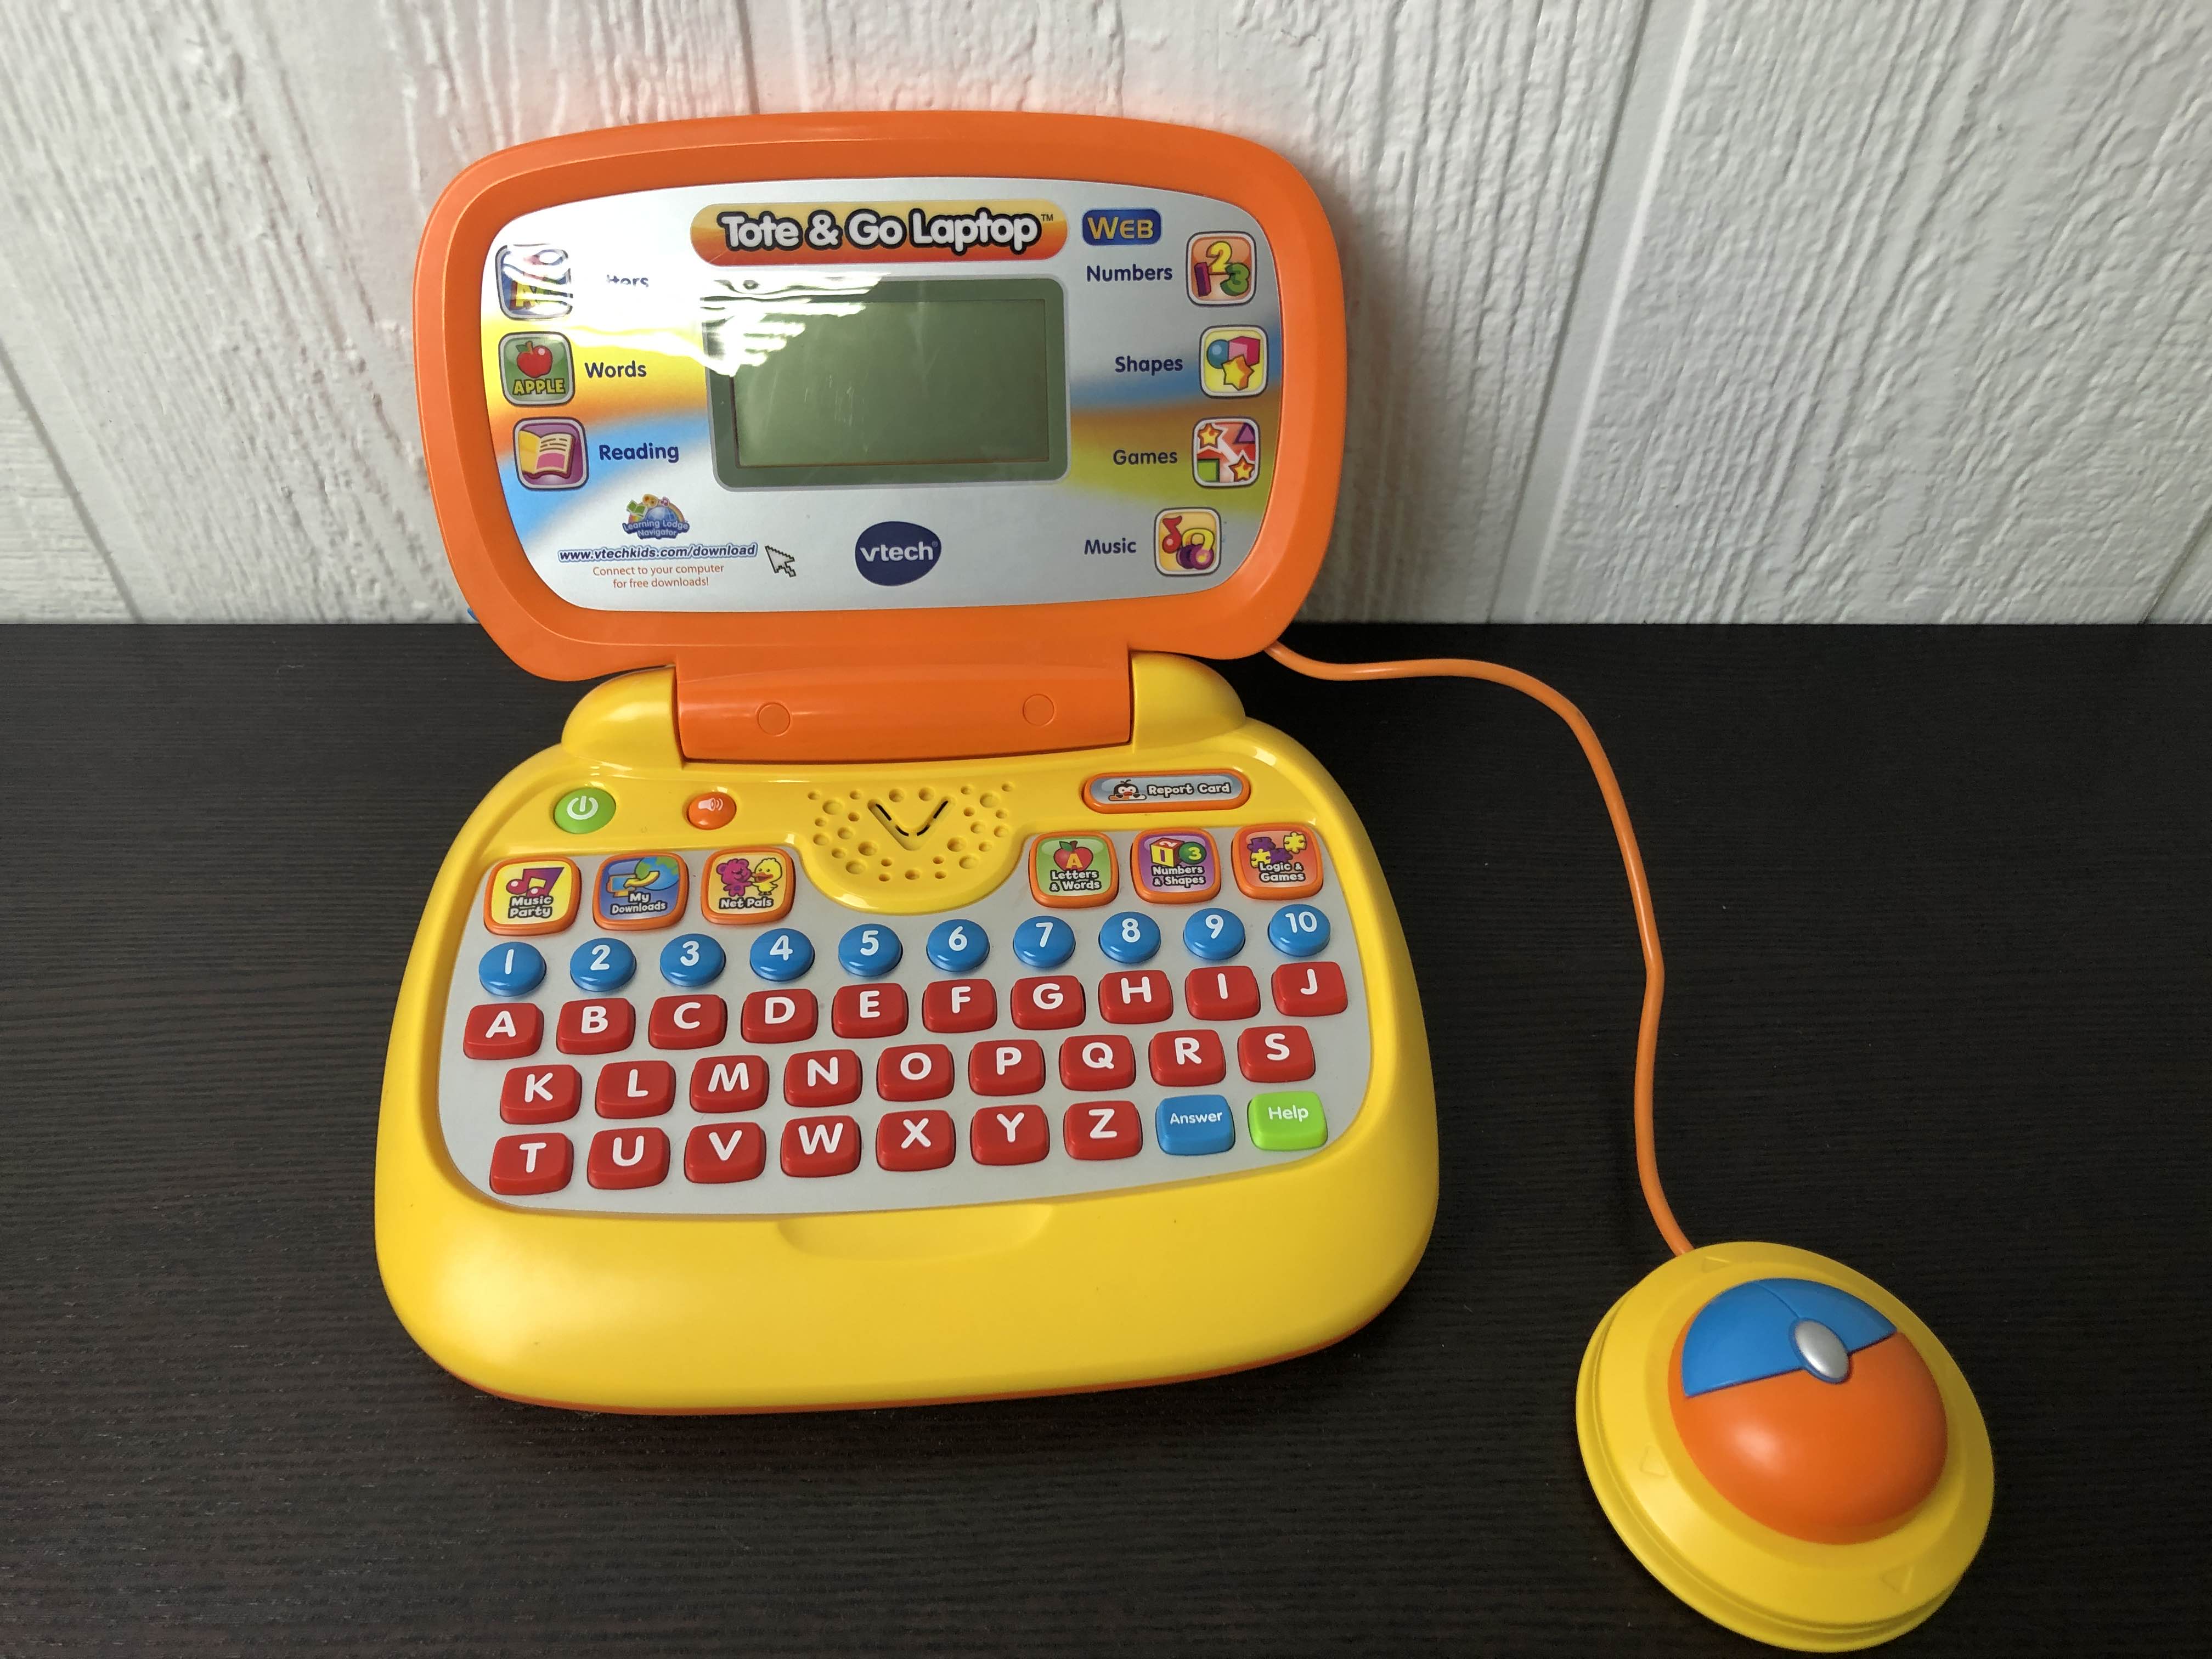 VTech Tote and Go Laptop is Customizable and Includes 20